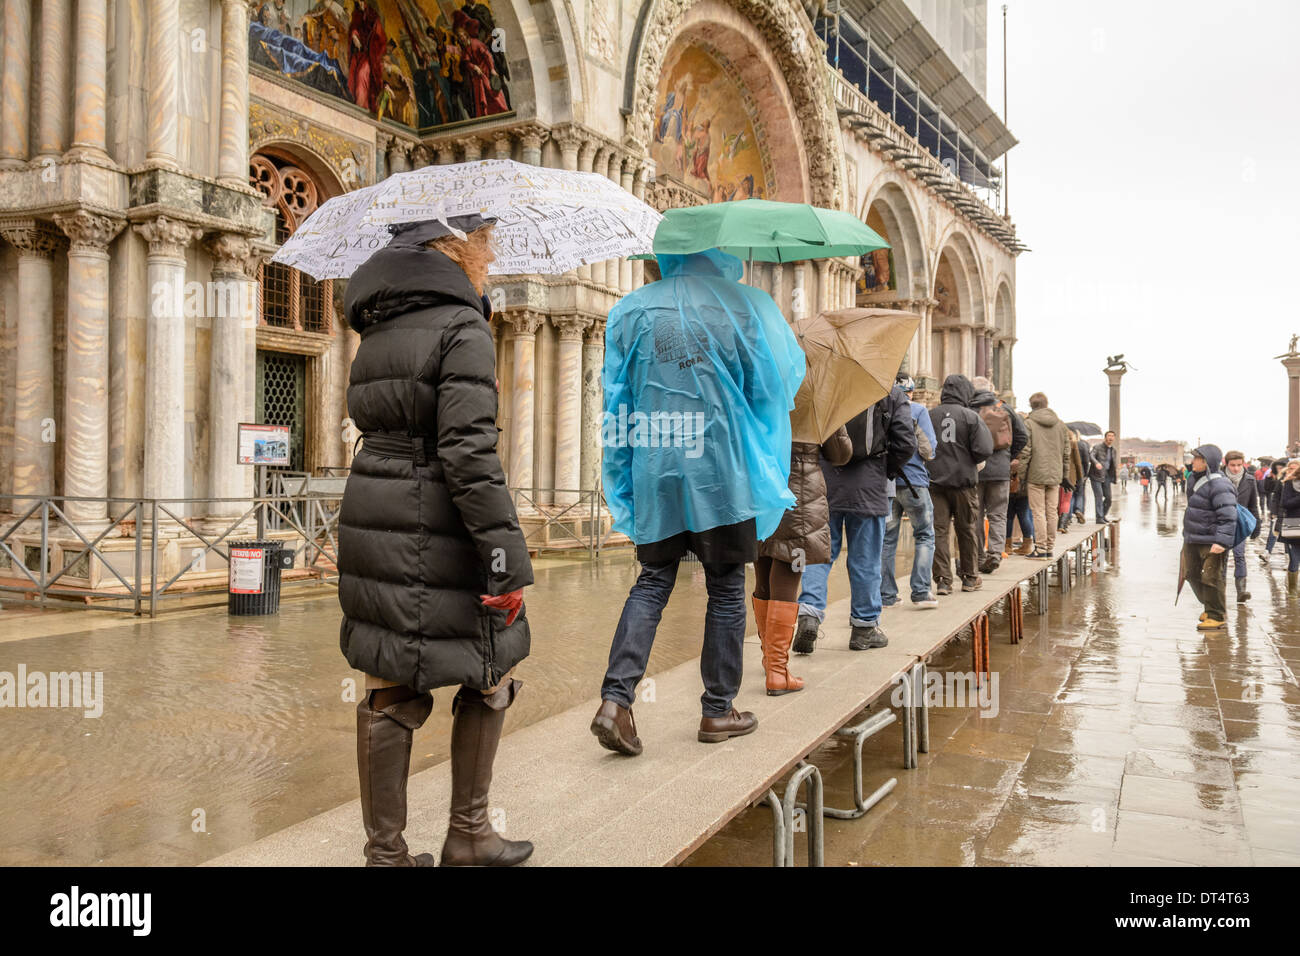 Venice, Italy. Tourists on acqua alta (high water) gangways queuing to enter the San Marco Basilica. Stock Photo